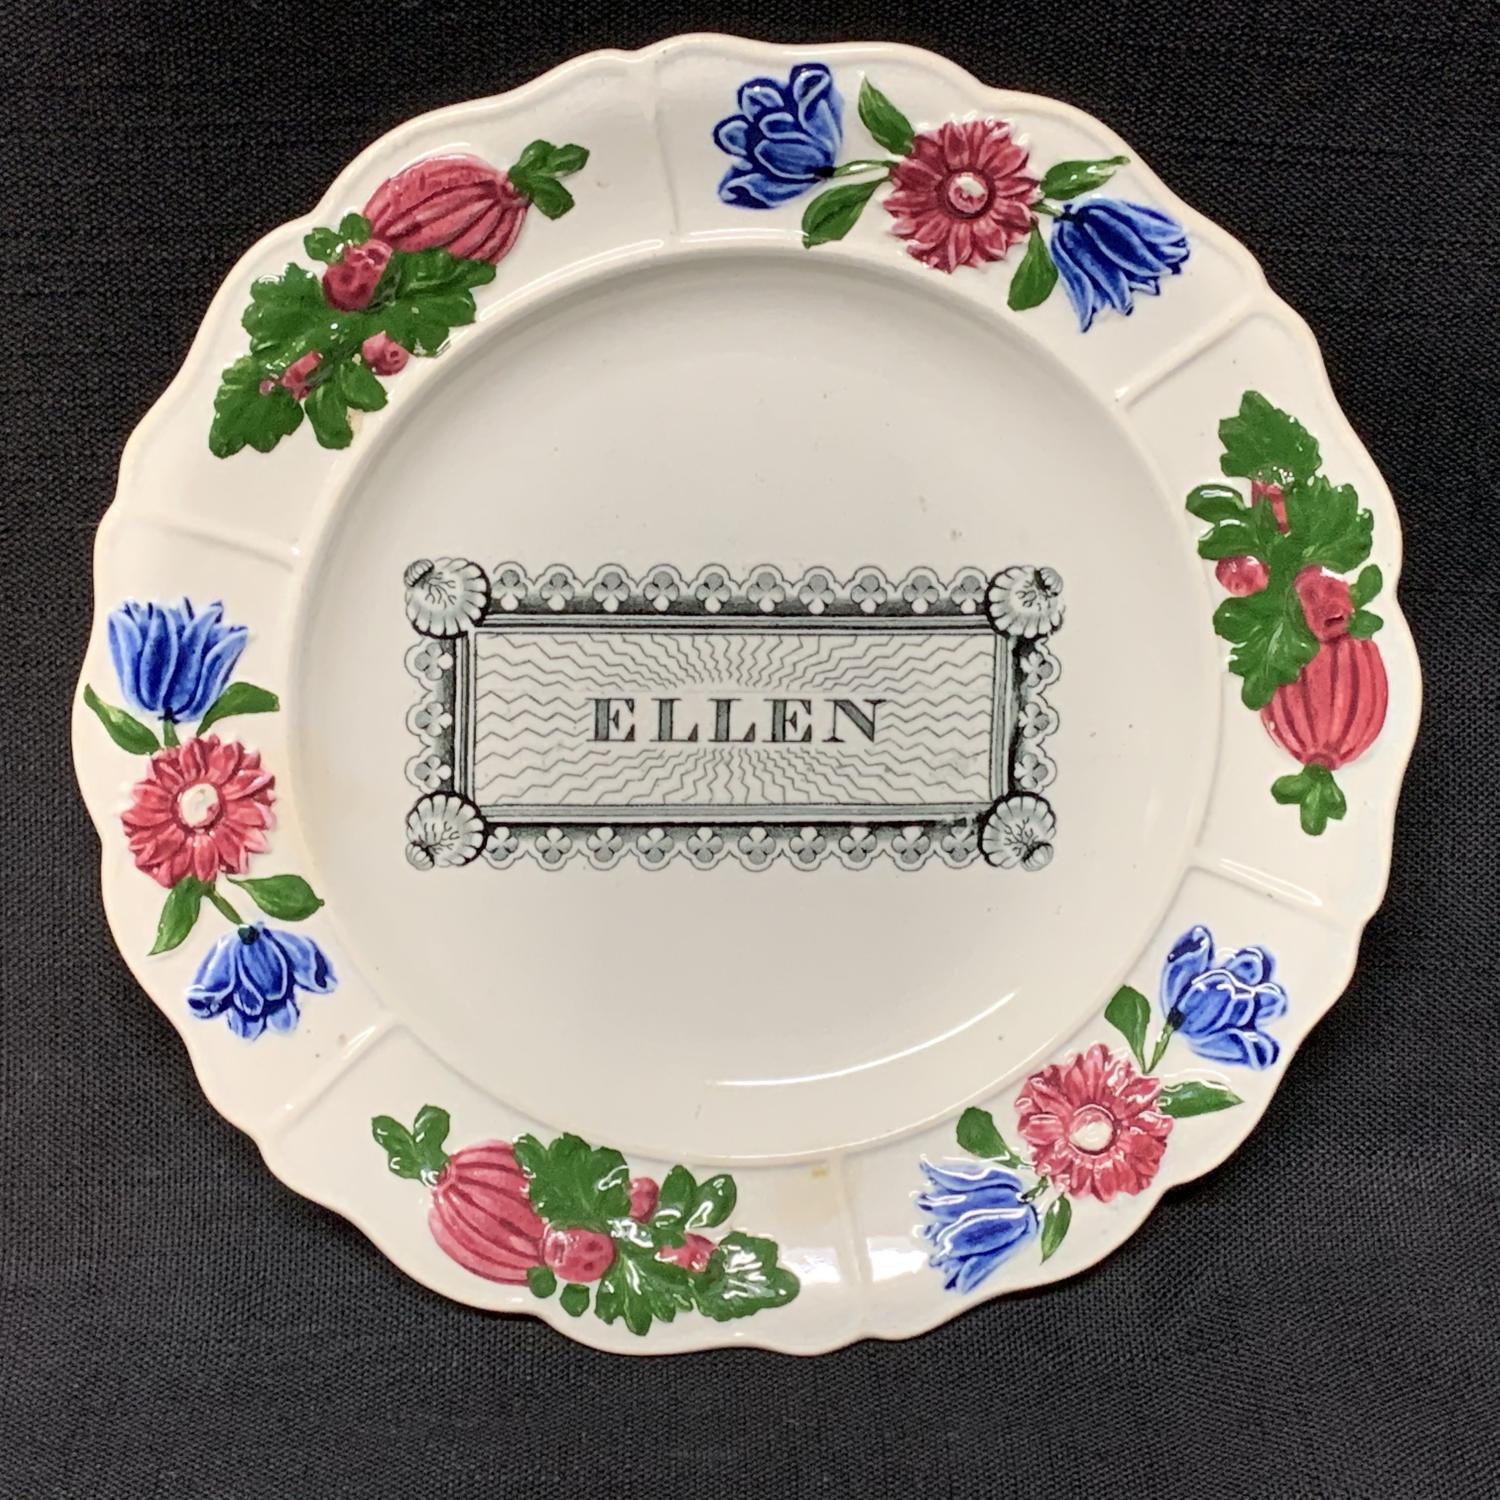 Staffordshire Childs Pearlware Name Plate for ELLEN 1830